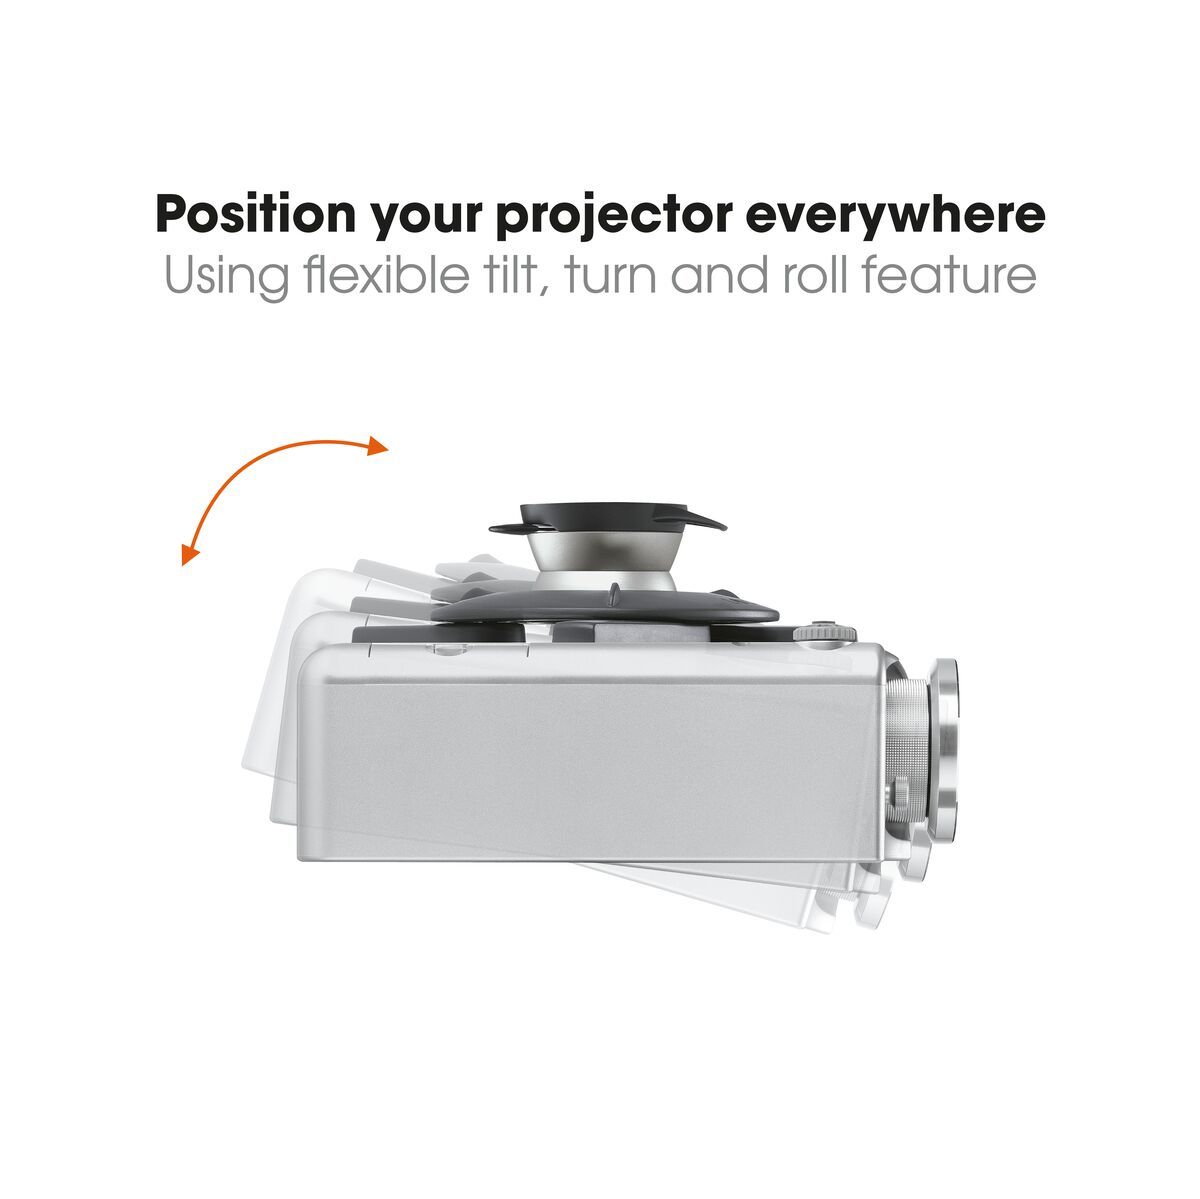 Vogel's EPW 6565 Projector Wall Mount - Max. weight load: USP